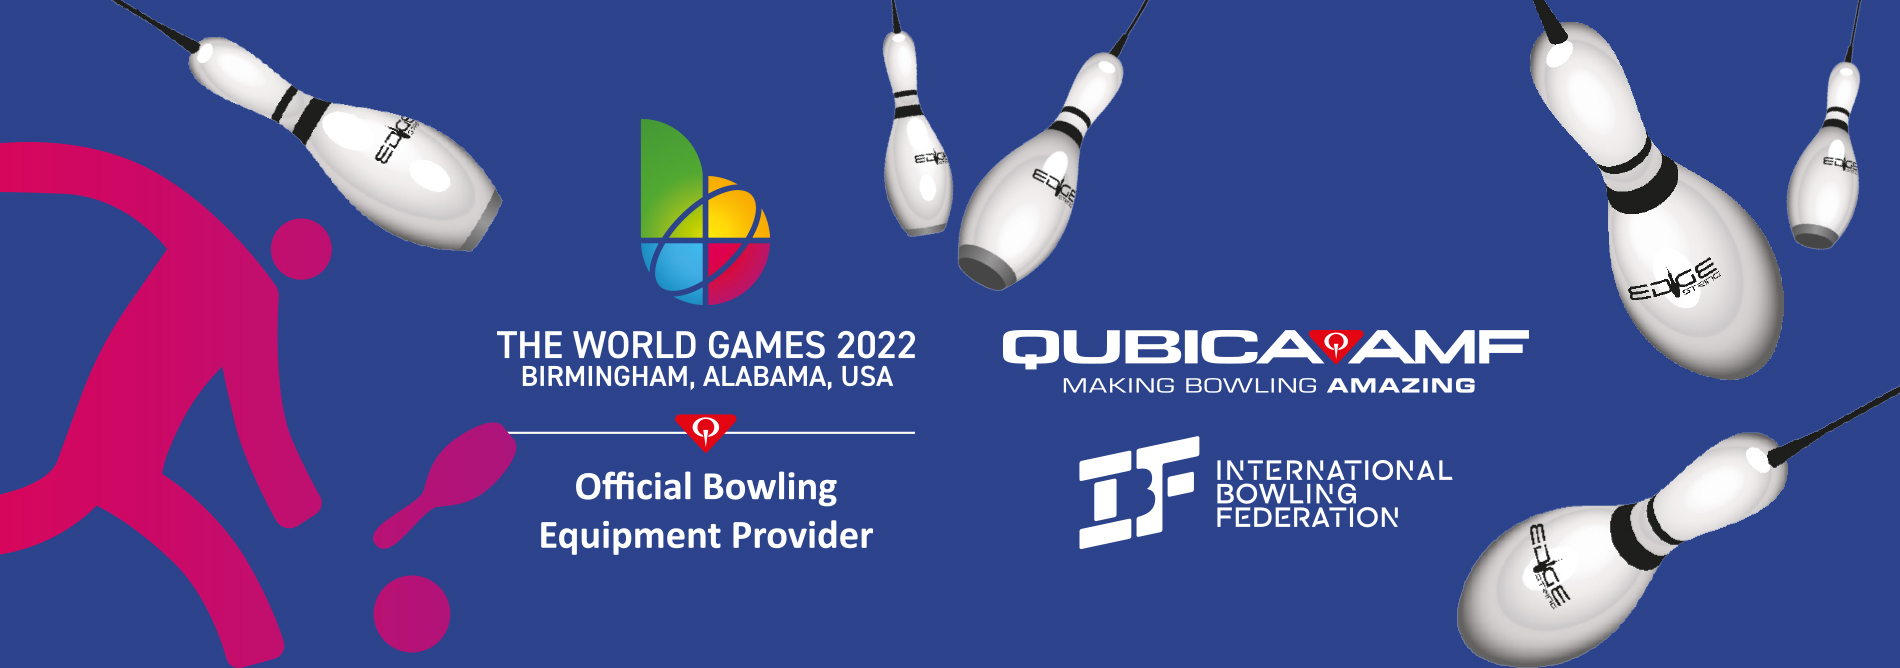 qubicaamf-bowling-2022-the-world-game-banner-HOME